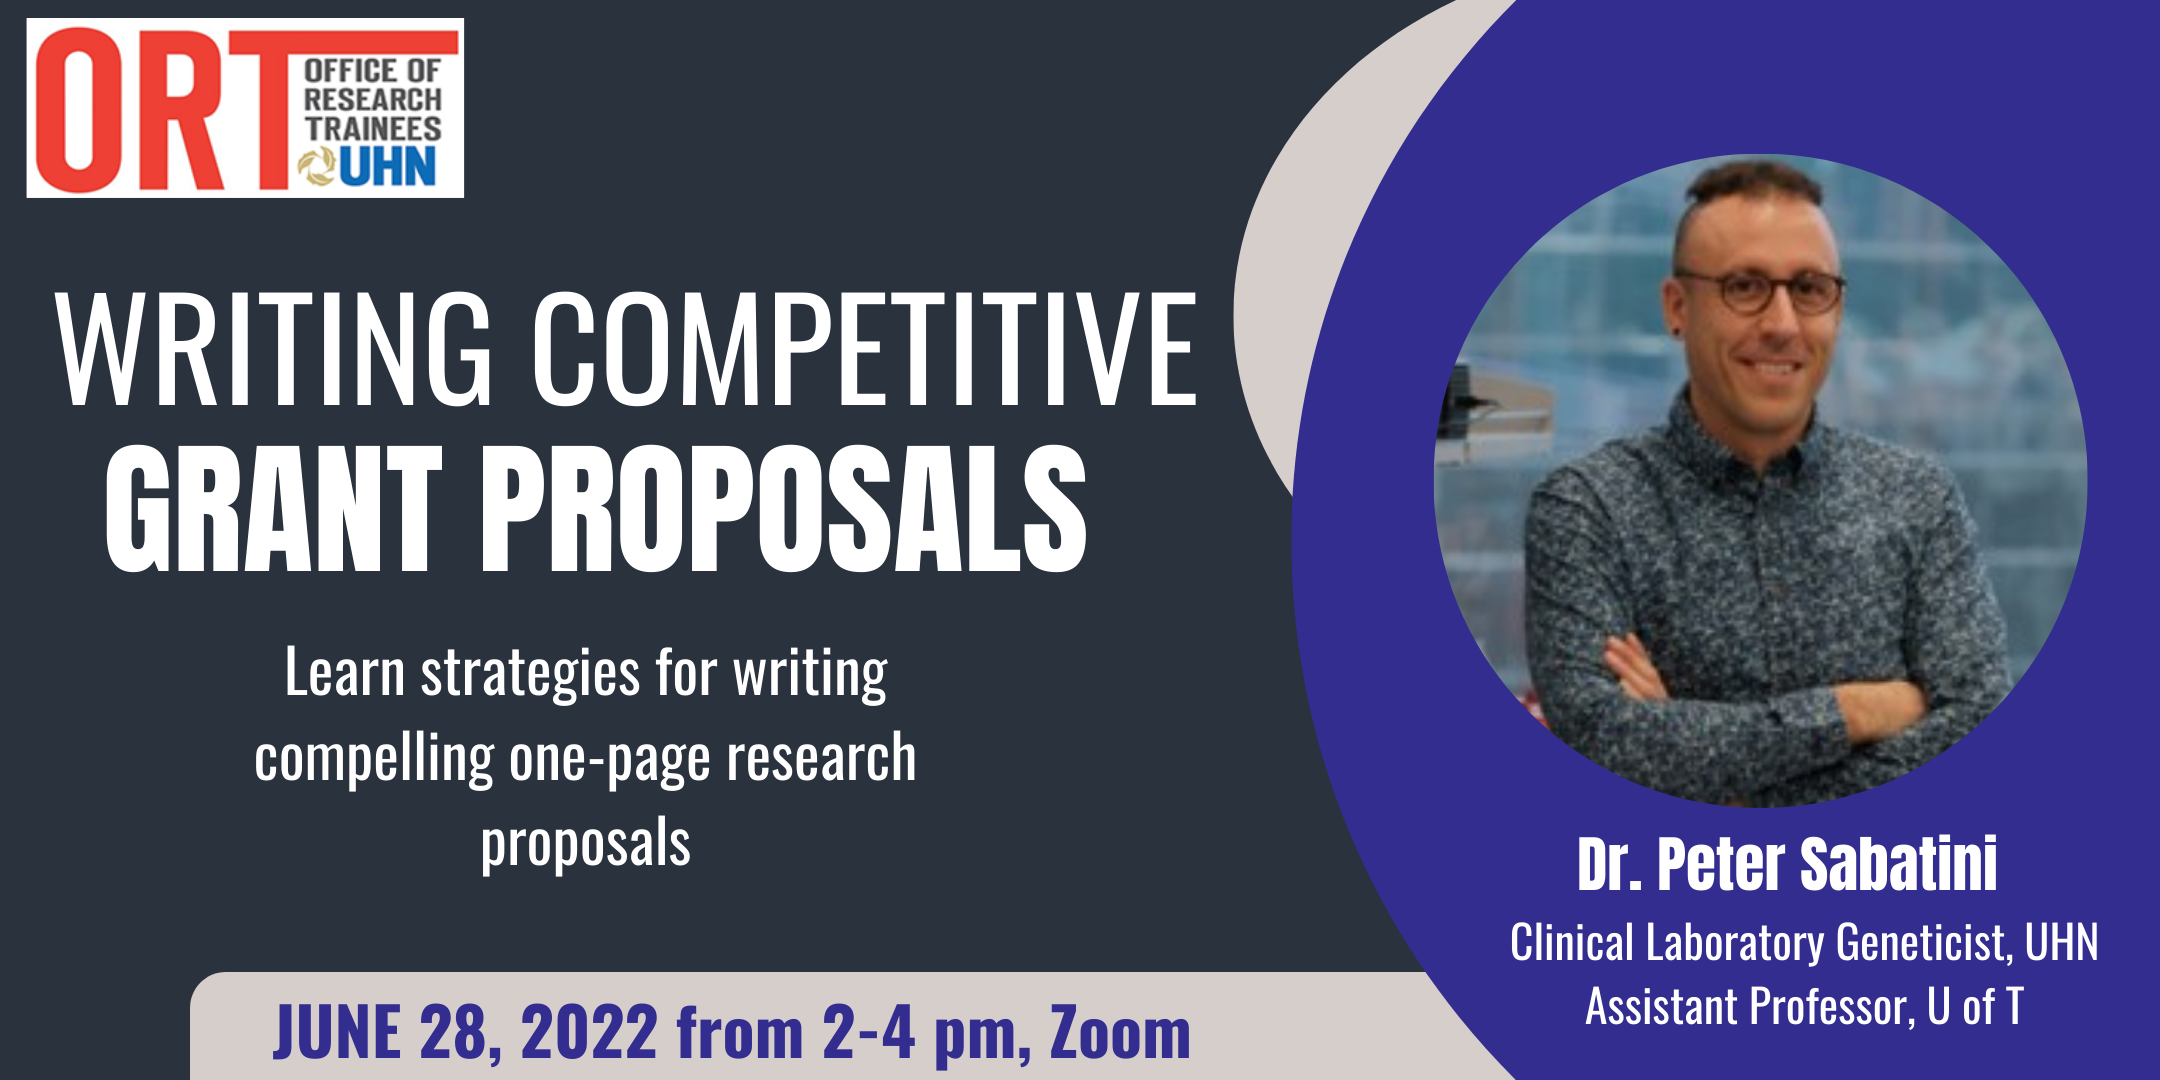 Dark blue ORT event poster with white writing. It reads "Writing Competitive Grant Proposals. Learn strategies for writing compelling one-page research proposals. June 28, 2022 from 2-4 pm, Zoom." A photo of the speaker is seen on the right side and below it is reads "Dr. Peter Sabatini, Clinical Laboratory Geneticist, UHN, Assistant professor, U of T". The ORT logo is seen on the top left corner.